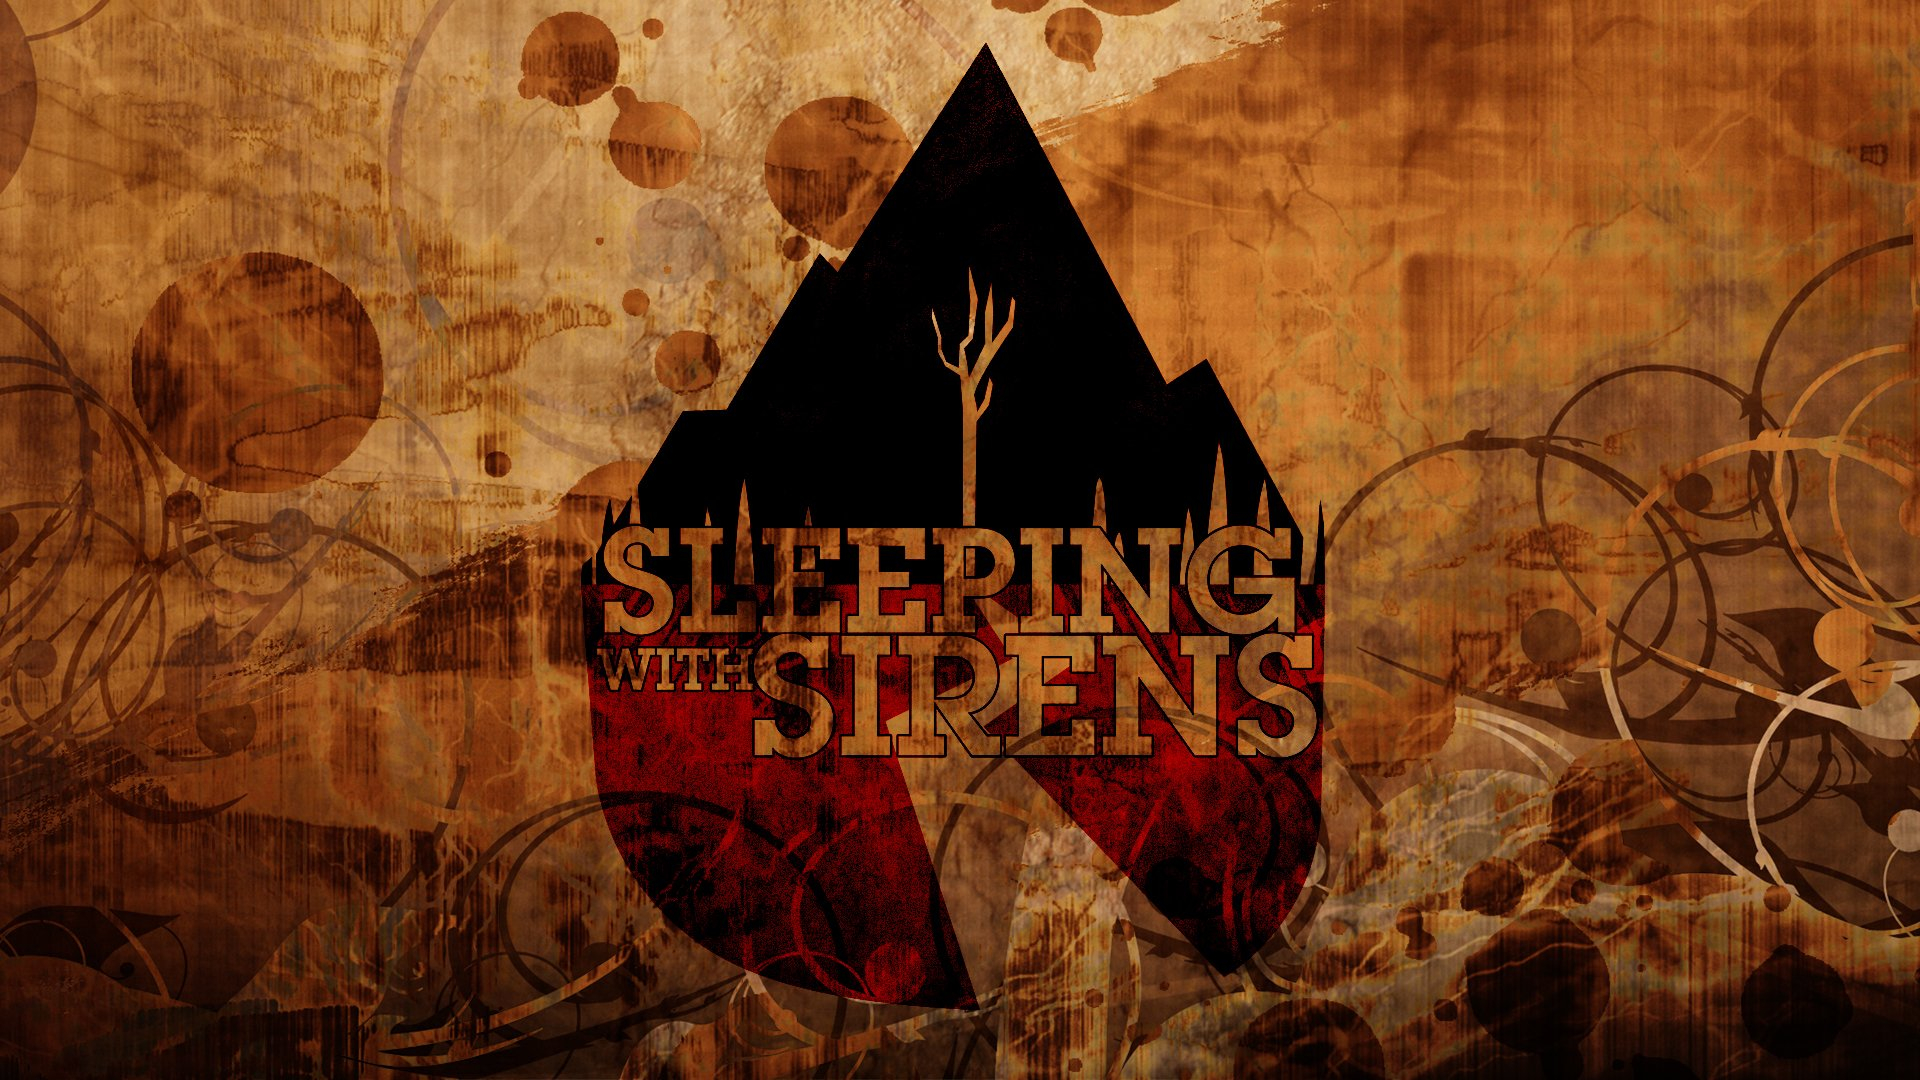 1920x1080 Sleeping with Sirens HD Wallpapers and Backgrounds